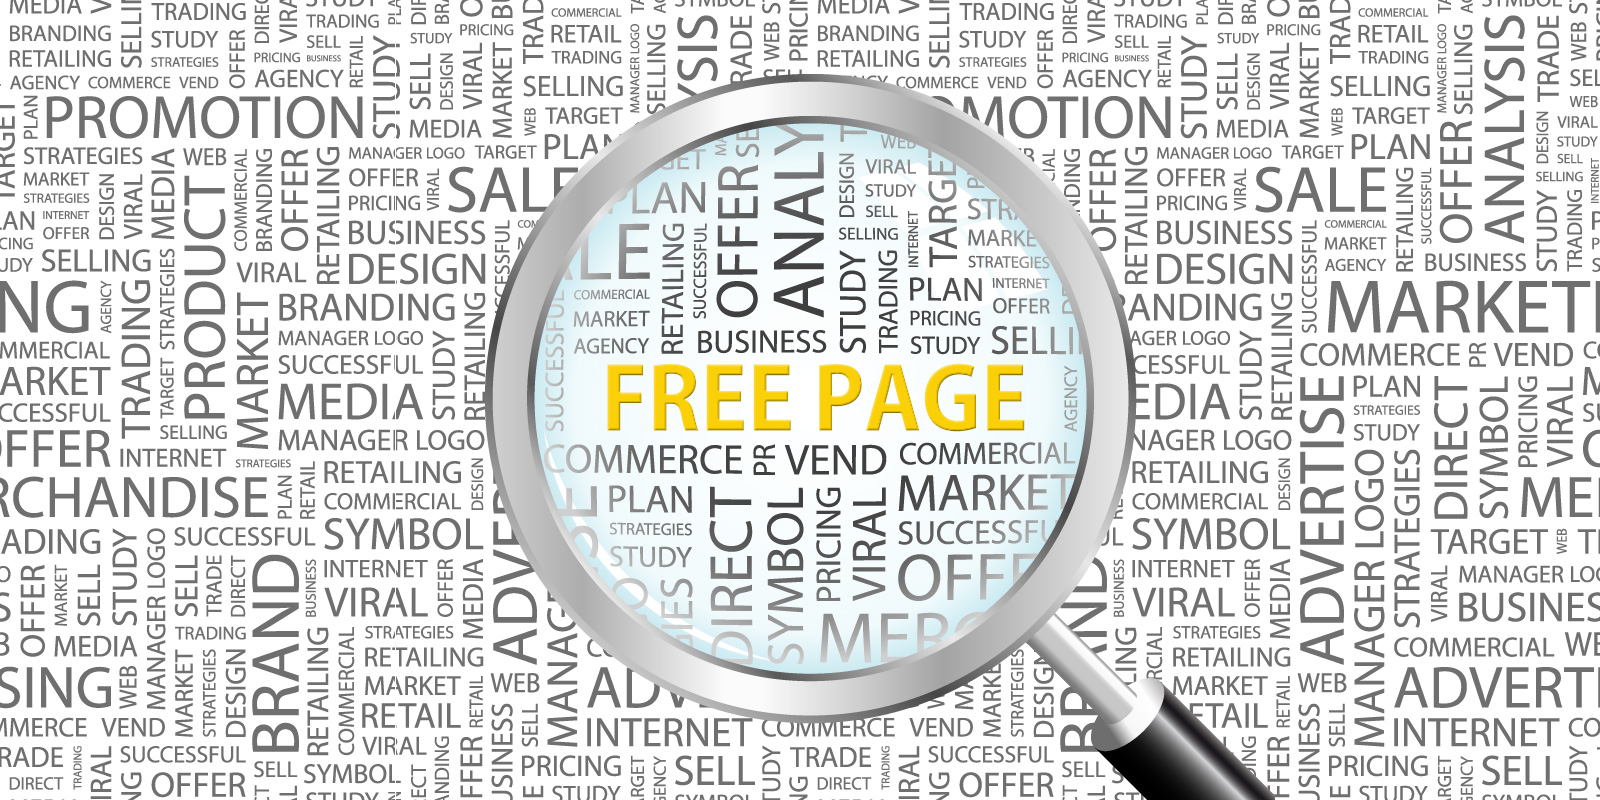 free_page